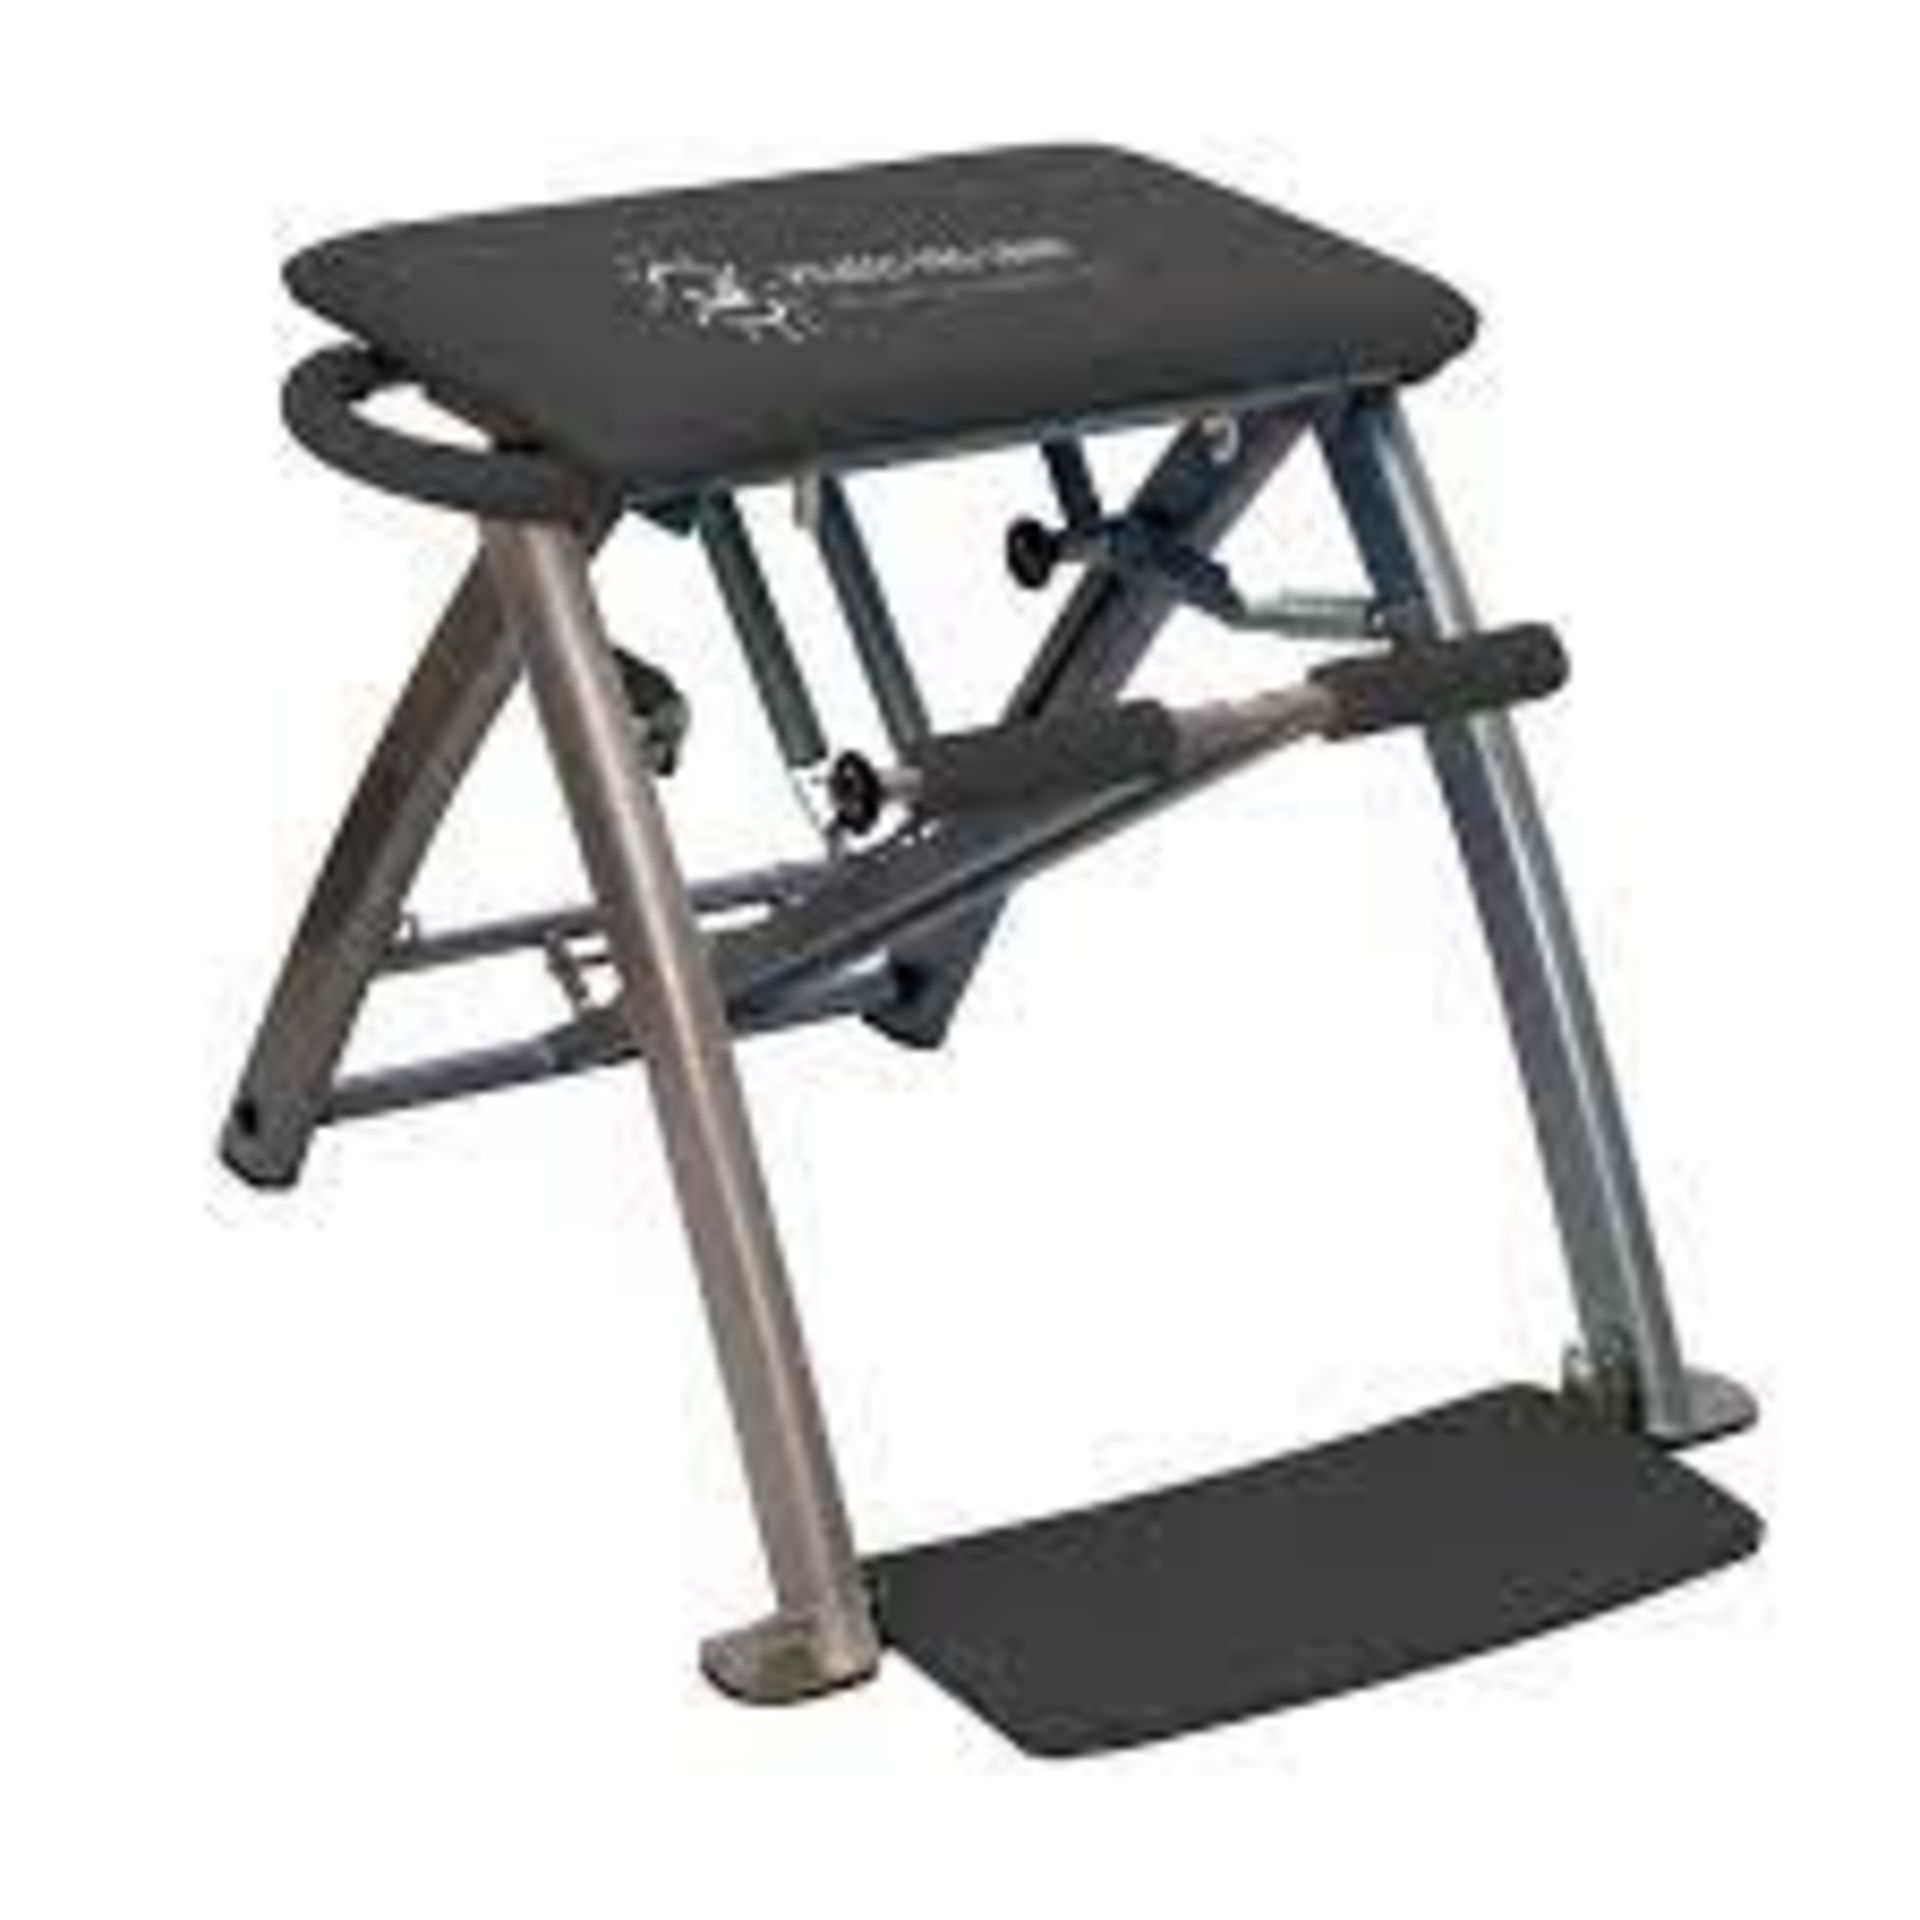 RRP £240 Boxed Brand New Sealed Pilates Pro Chair With 4 DVDs By Life's A Beach